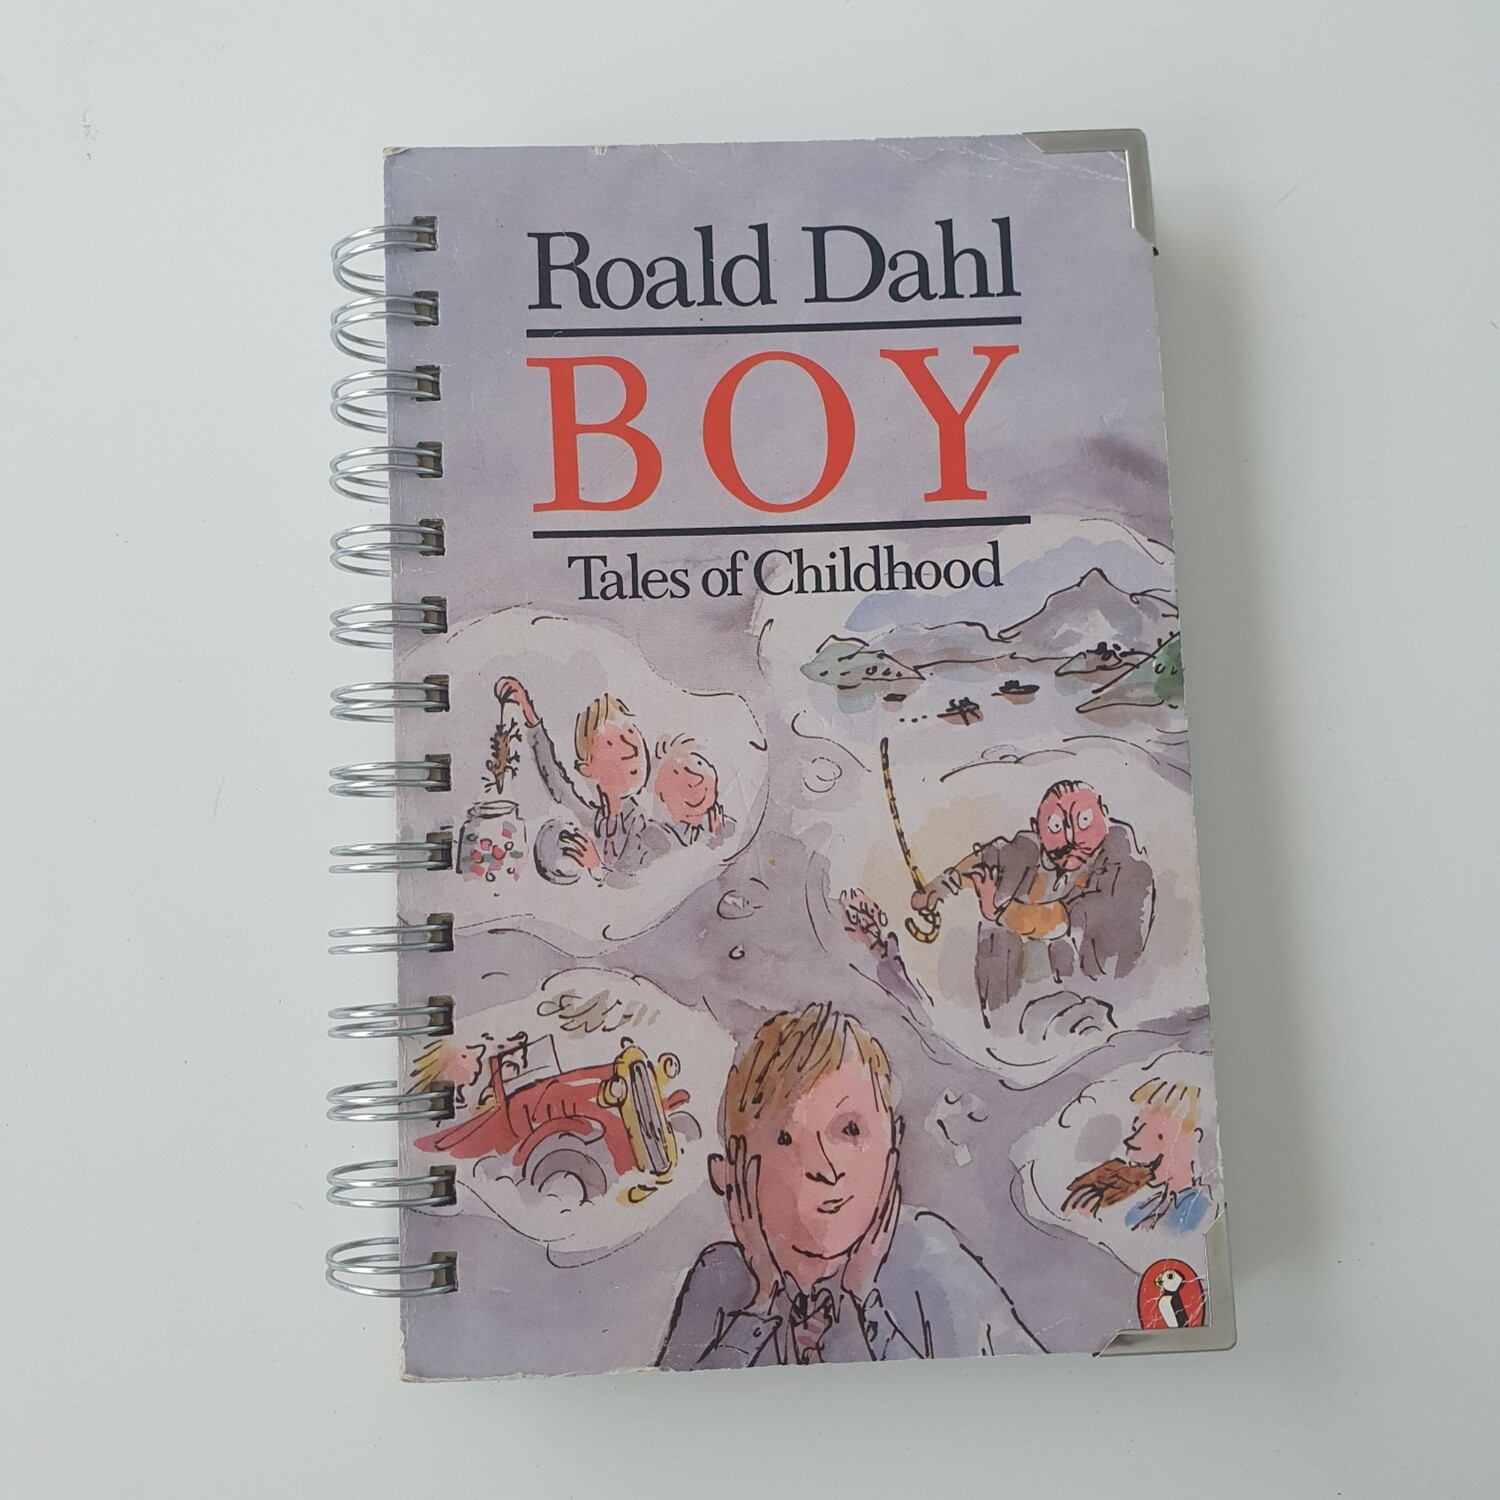 Roald Dahl 'Boy' plain  paper Notebook - made from a paperback book, READY TO SHIP